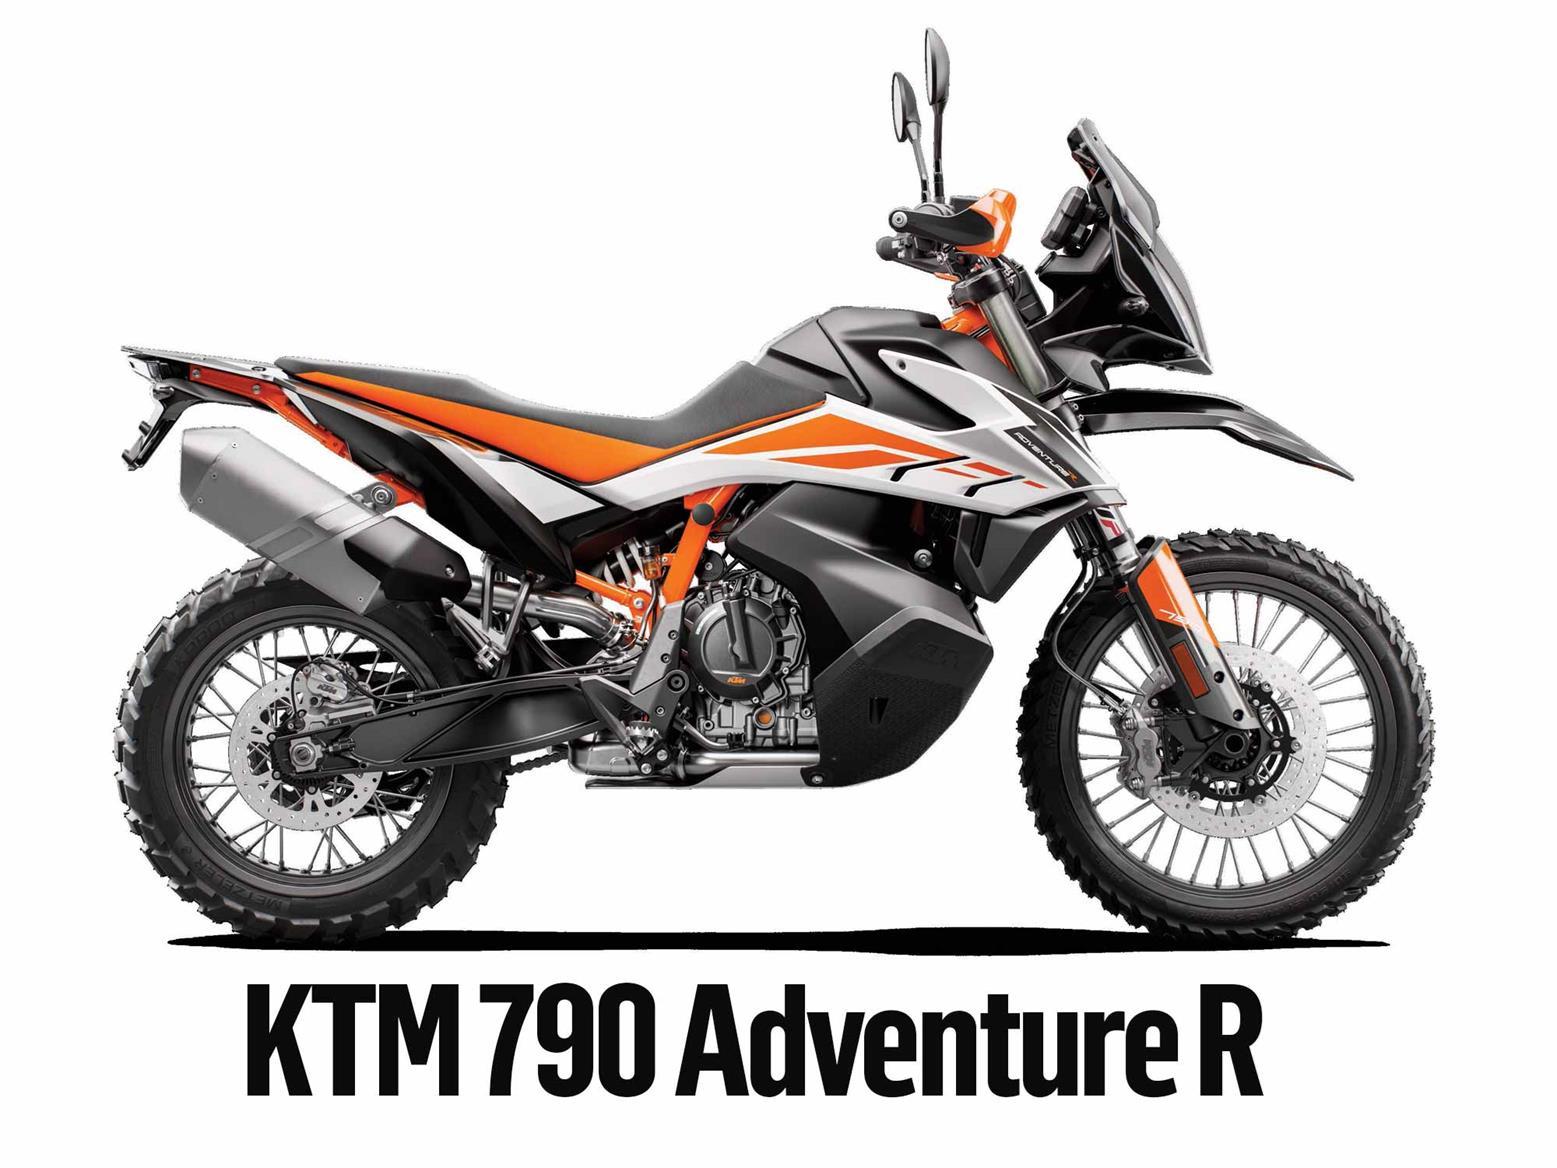 Read MCN's detailed KTM 790 Adventure R long-term test review here